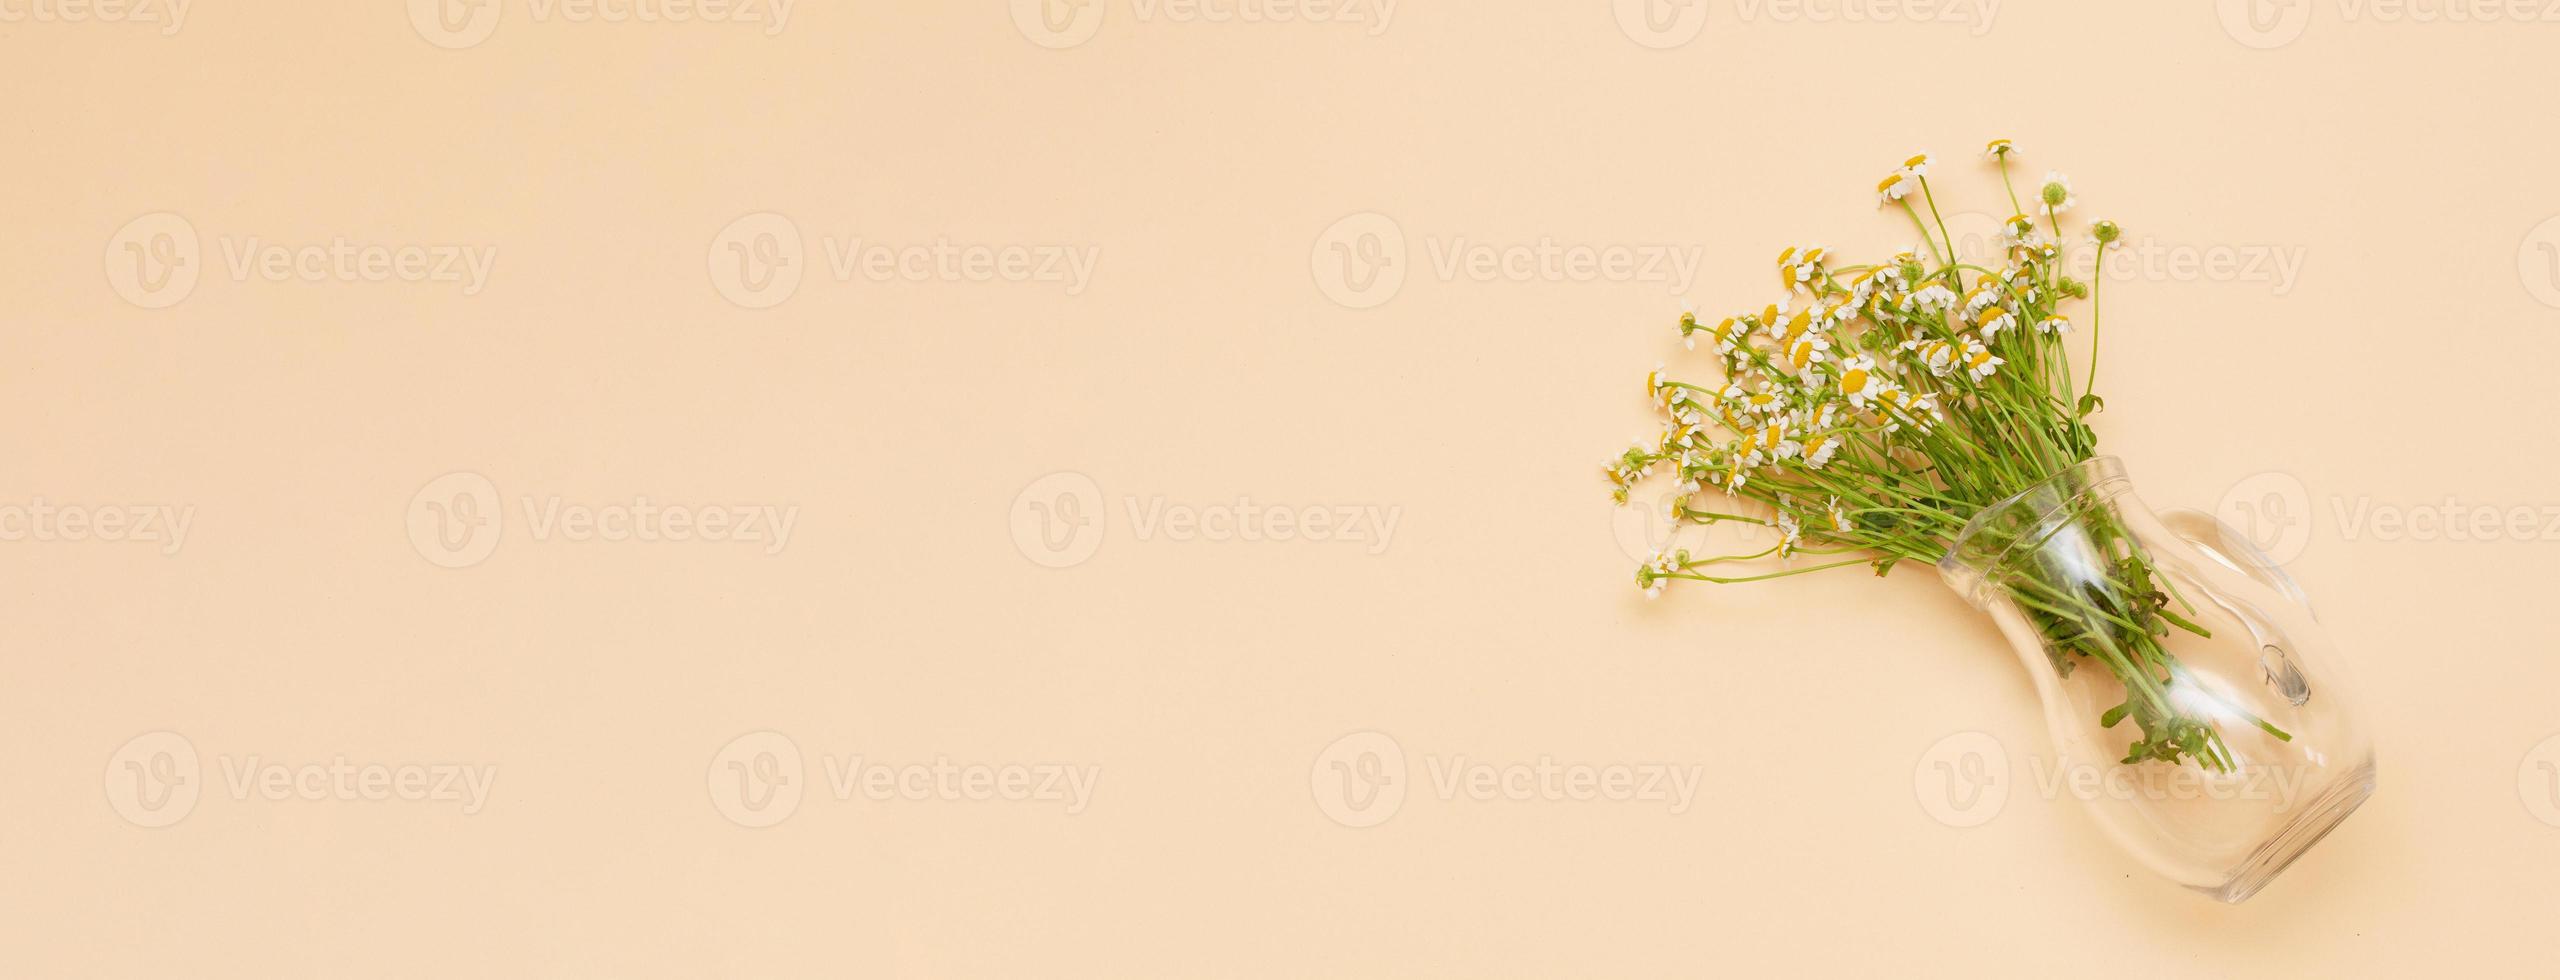 small chamomile flowers in a glass vase on photo